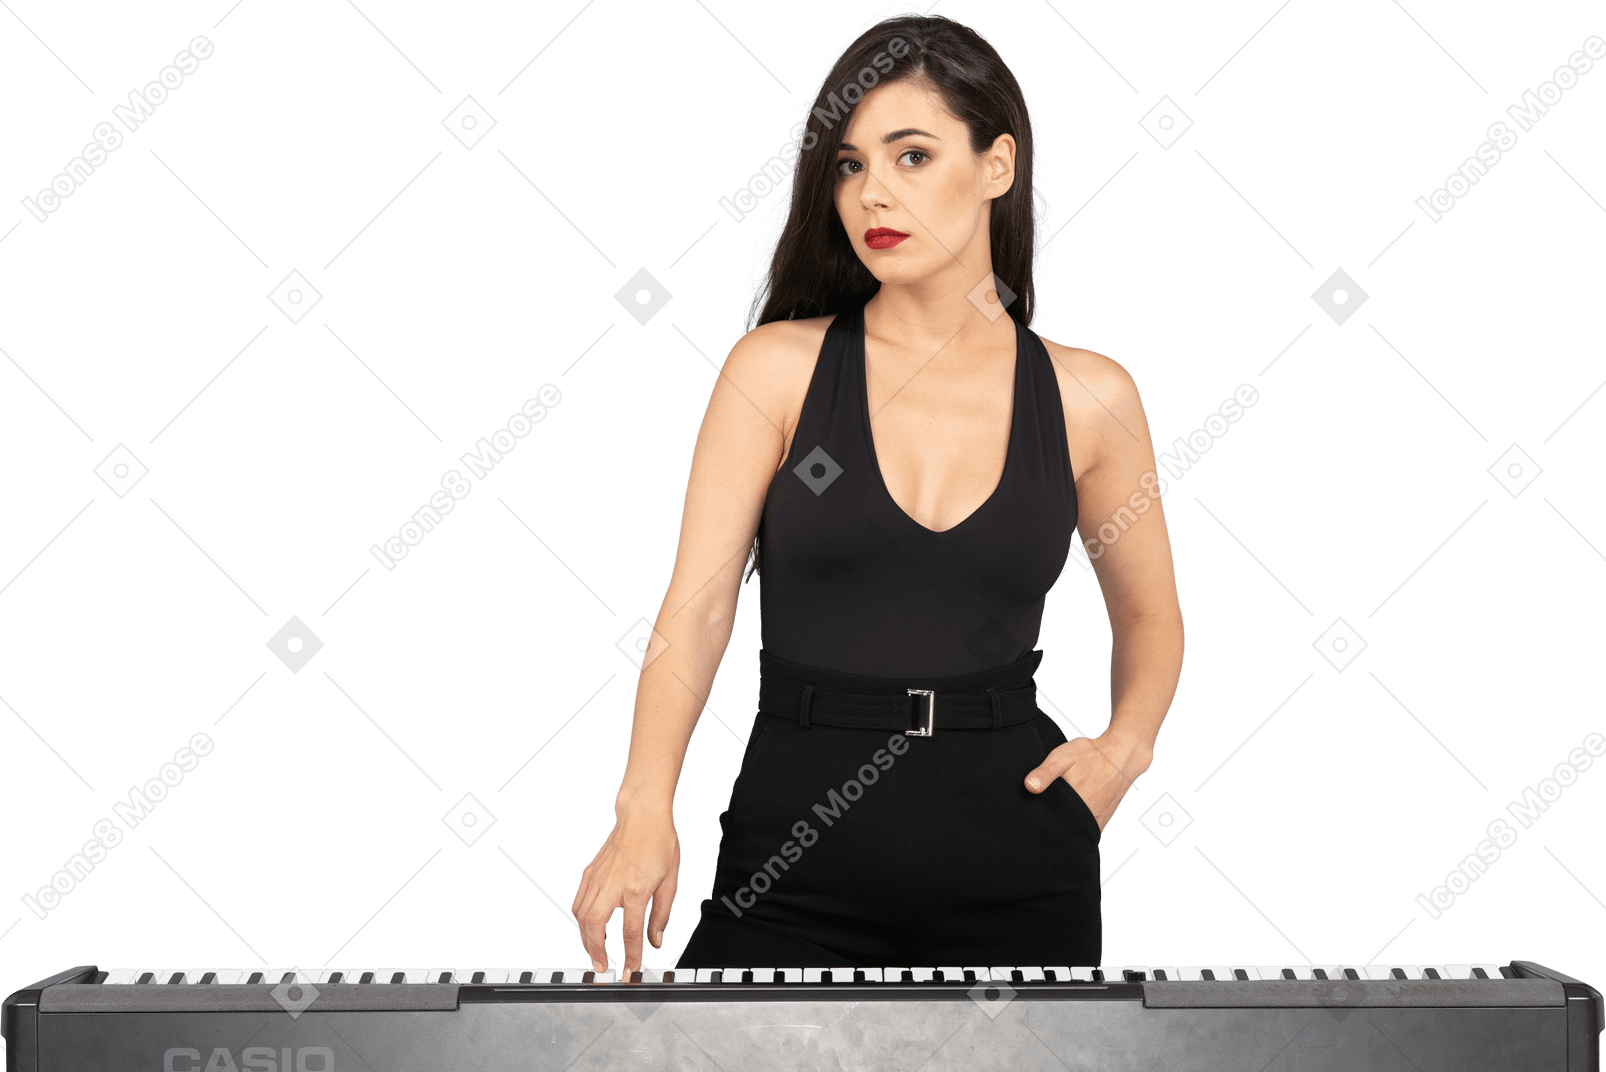 Front view of a young lady in black dress pressing the key of a piano